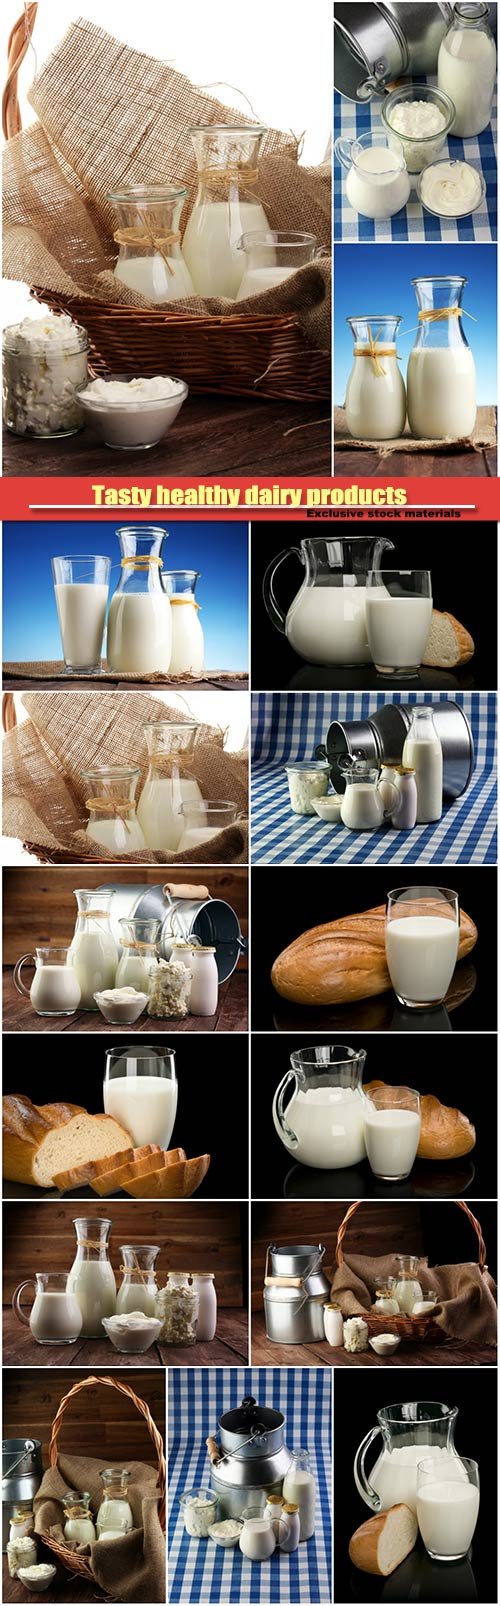 Tasty healthy dairy products, milk products